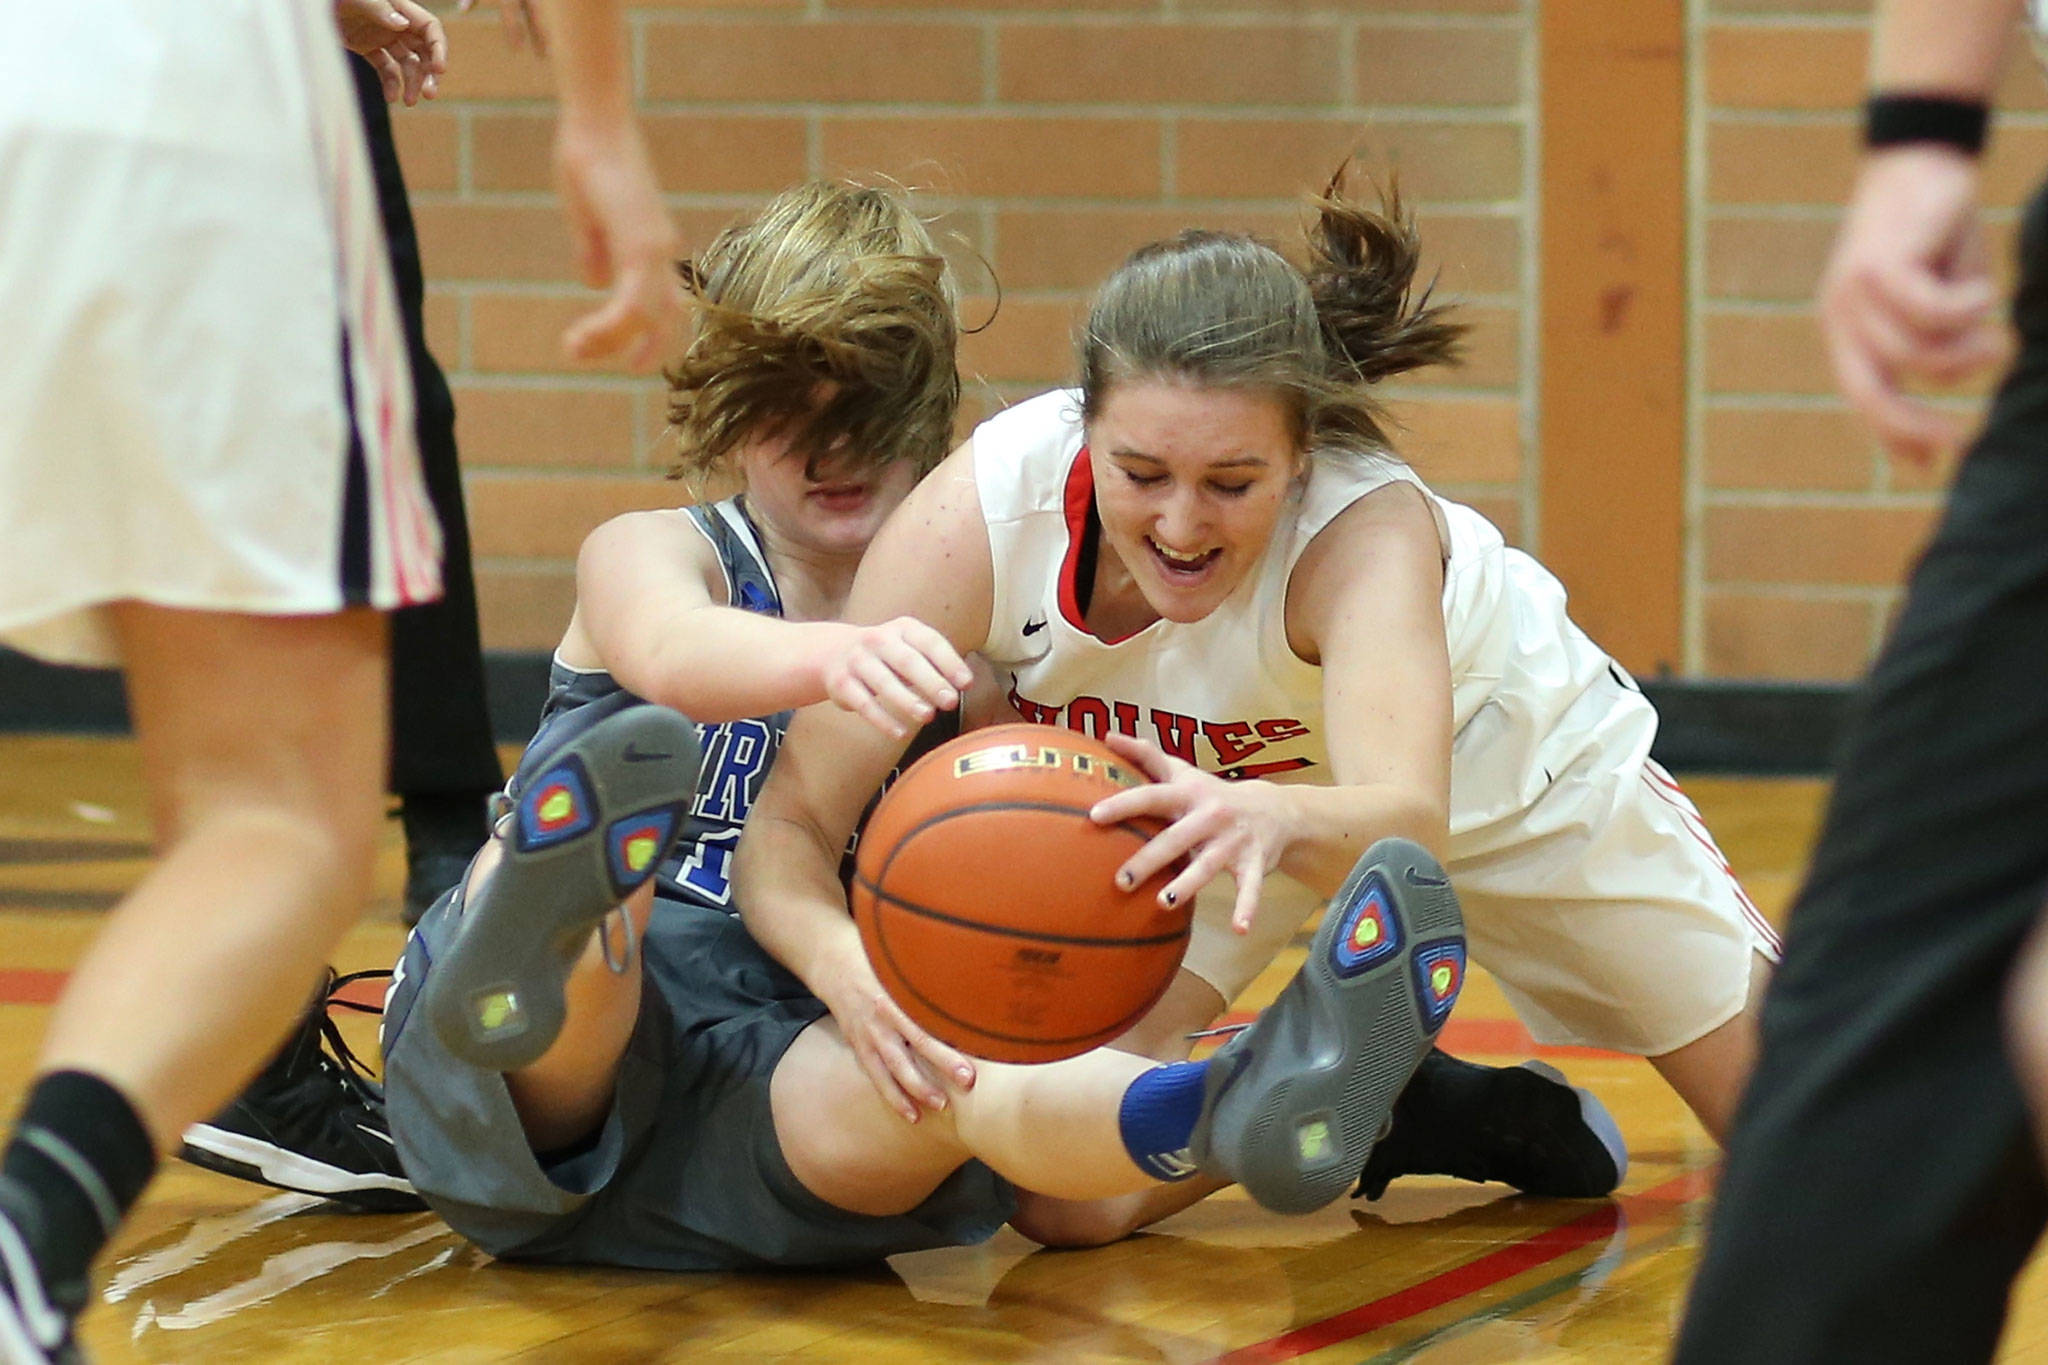 Coupeville’s Mikayla Elfrank dives over Mount Vernon Christian’s Josie Droog to corral a loose ball. (Photo by John Fisken)